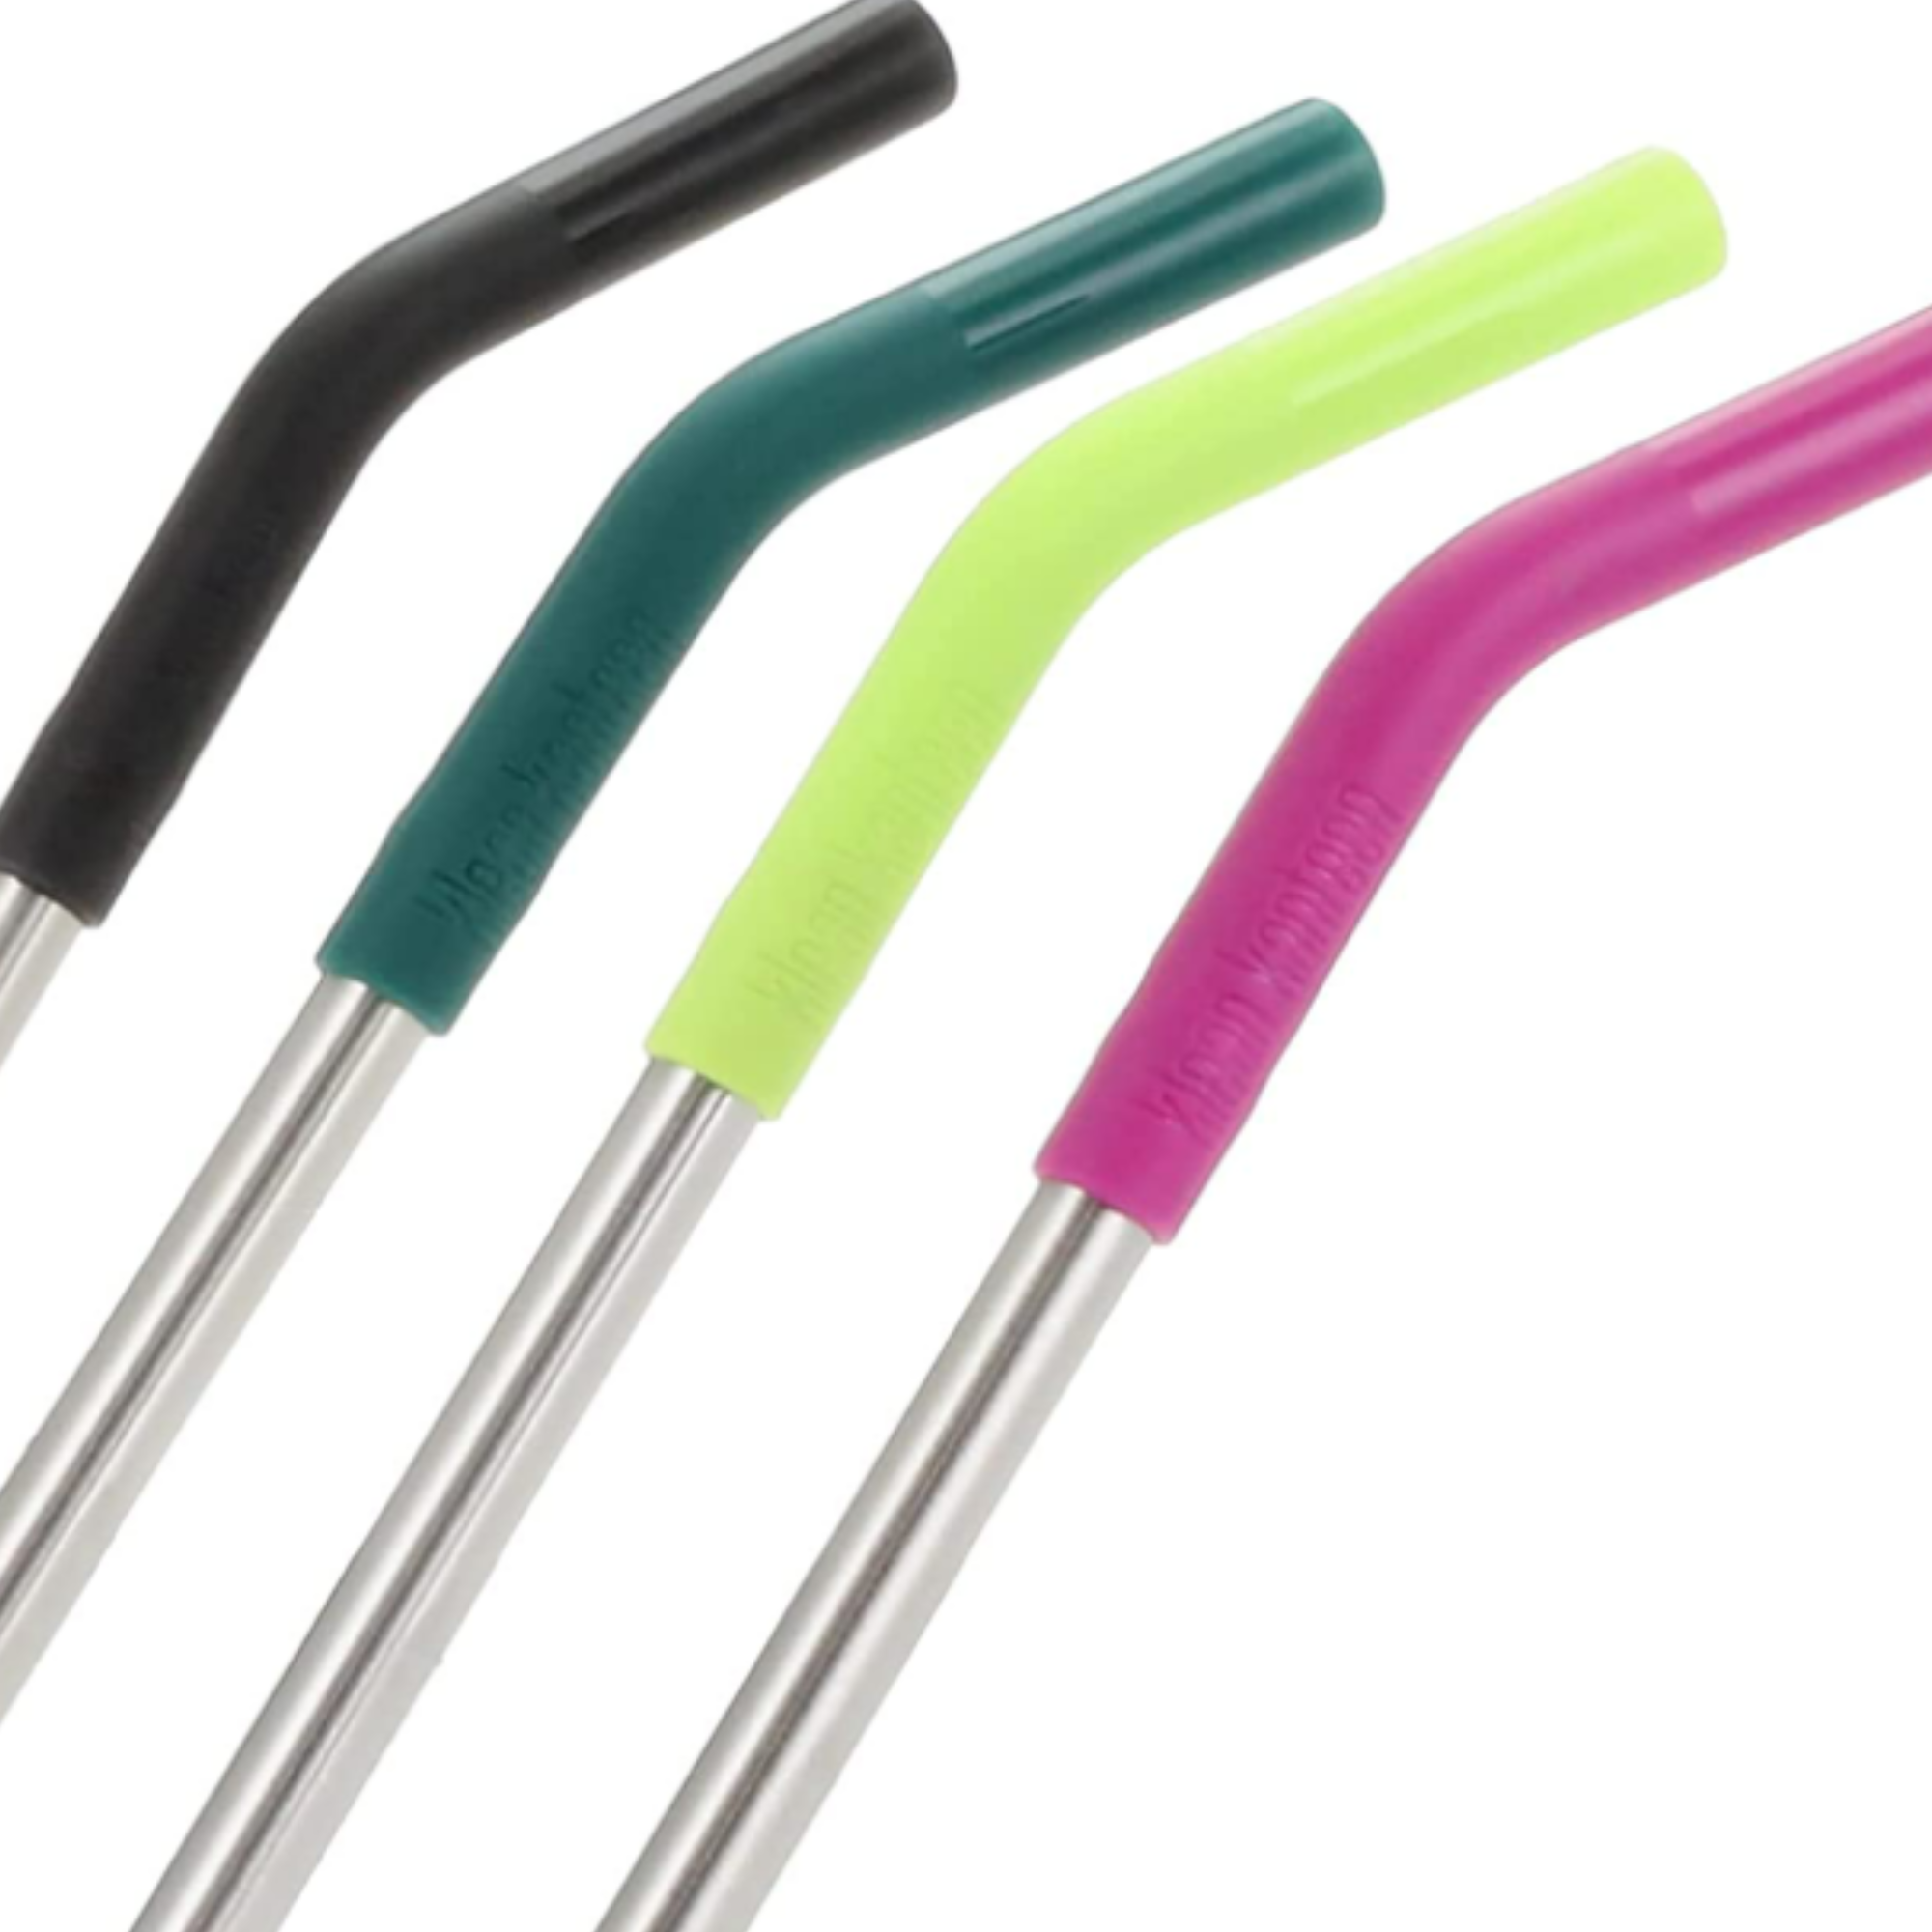 Four reusable straws in a variety of colors (one in black, one dark green, one neon green, and one magenta) 